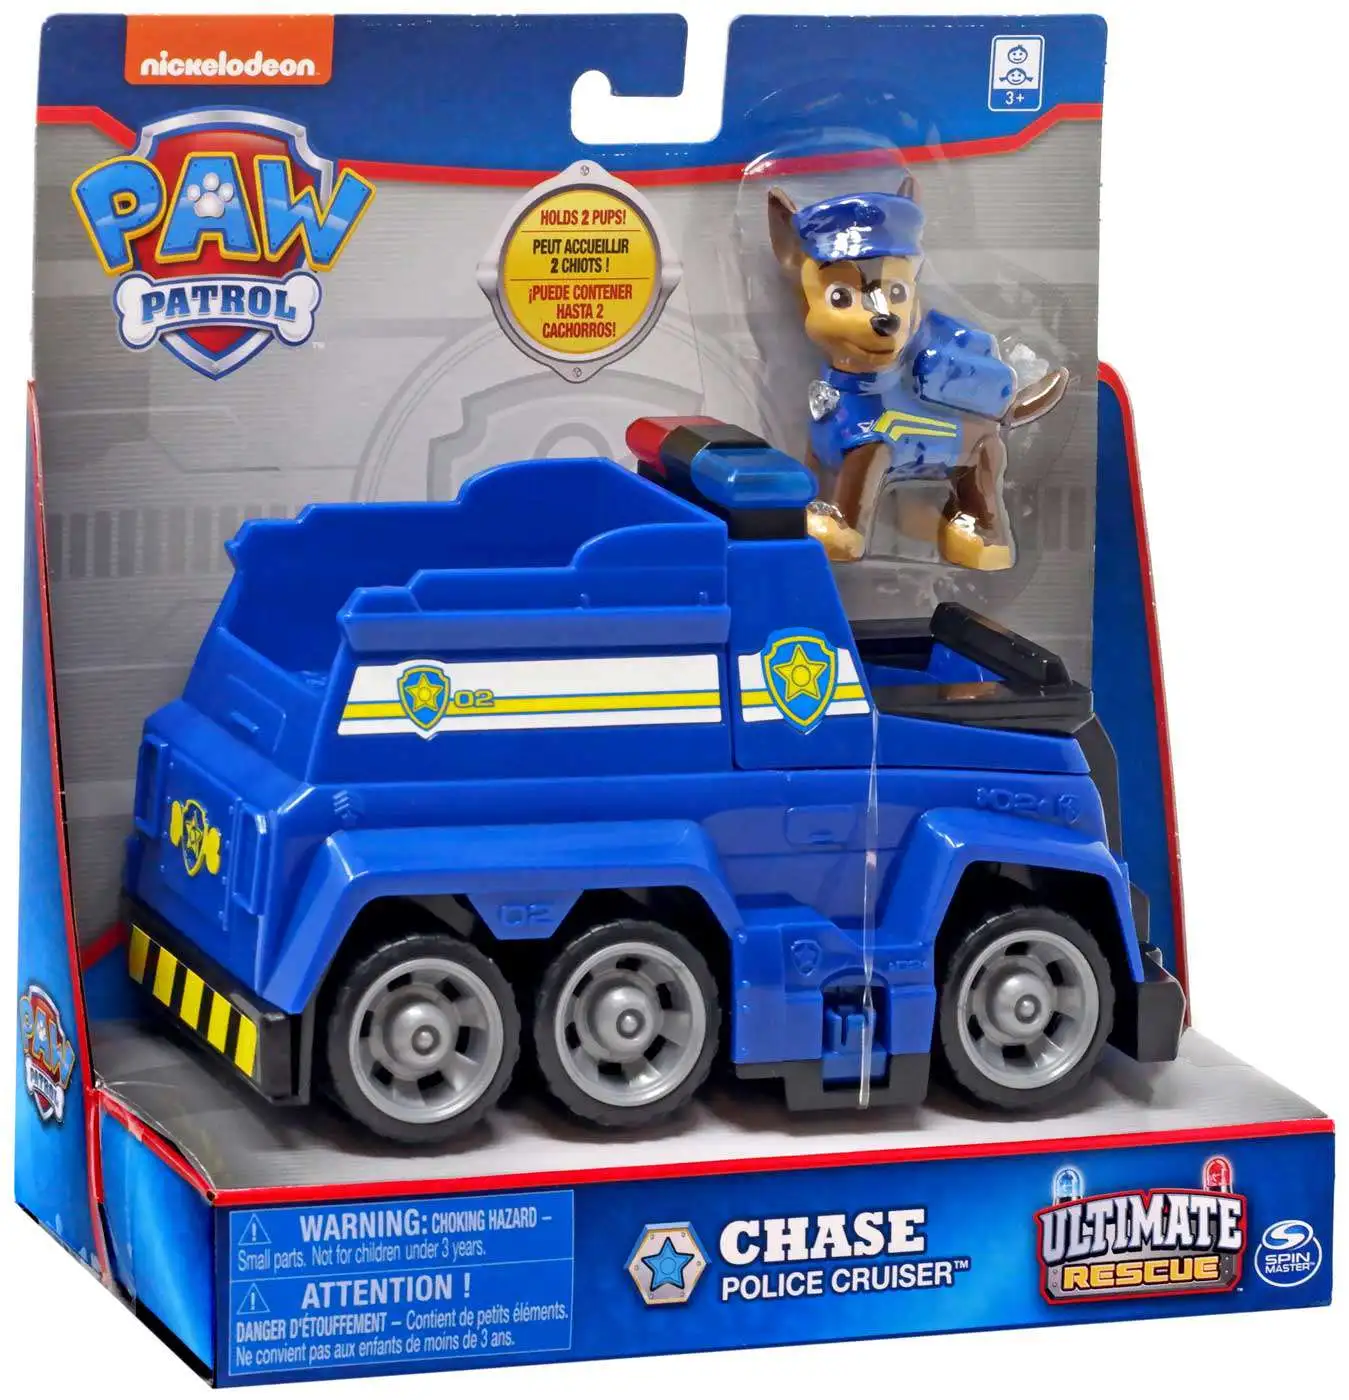 Paw Patrol Ultimate Rescue Chase Police Cruiser Vehicle & Figure [2020]